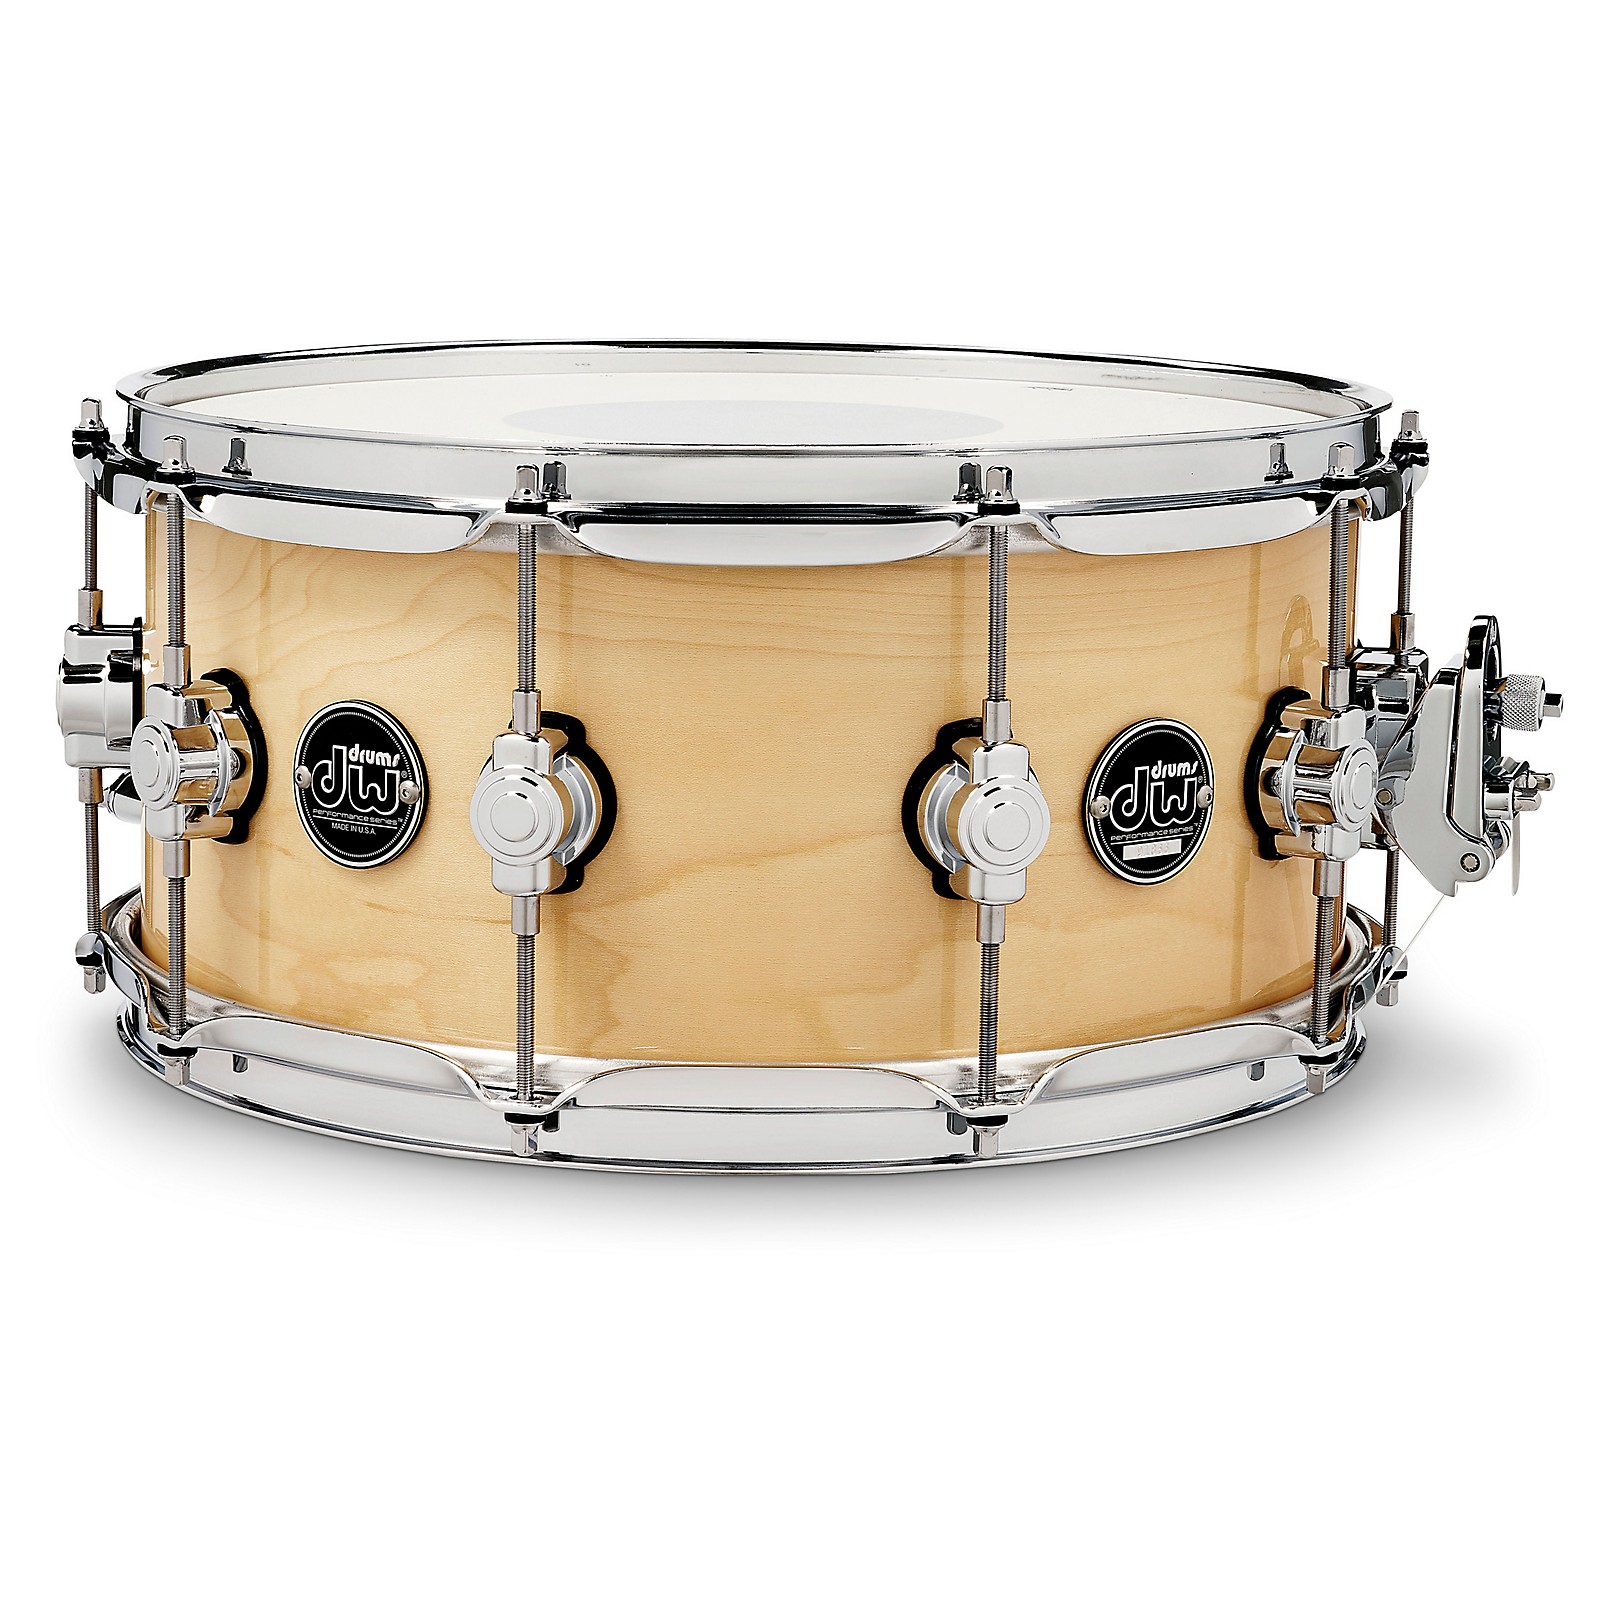 Dw Performance Series Snare Drum 14 X 65 In Natural Lacquer Musicians Friend 